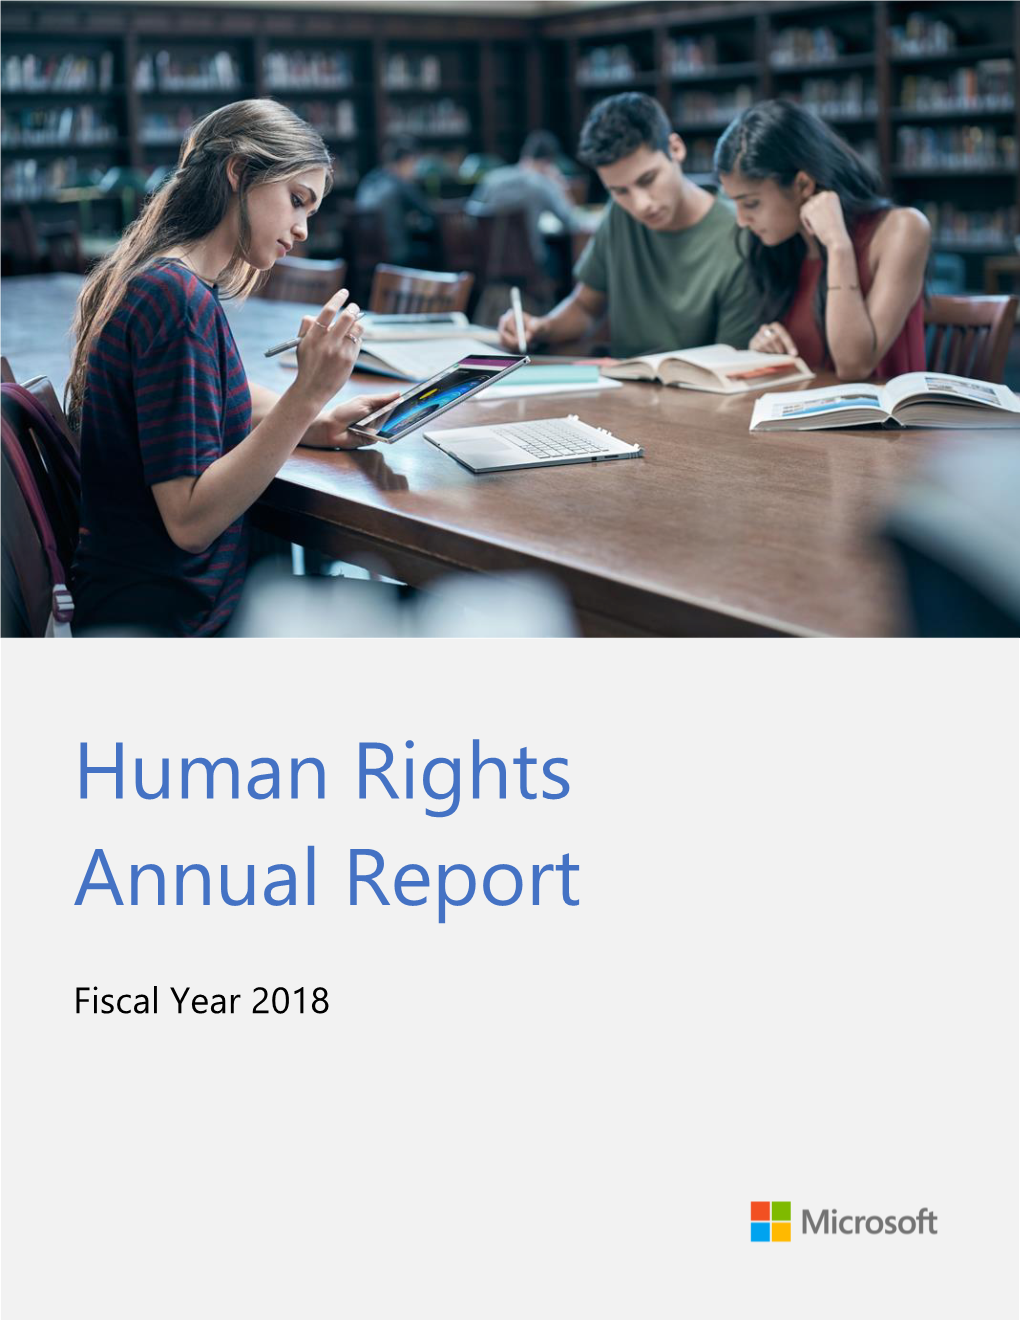 Human Rights Annual Report